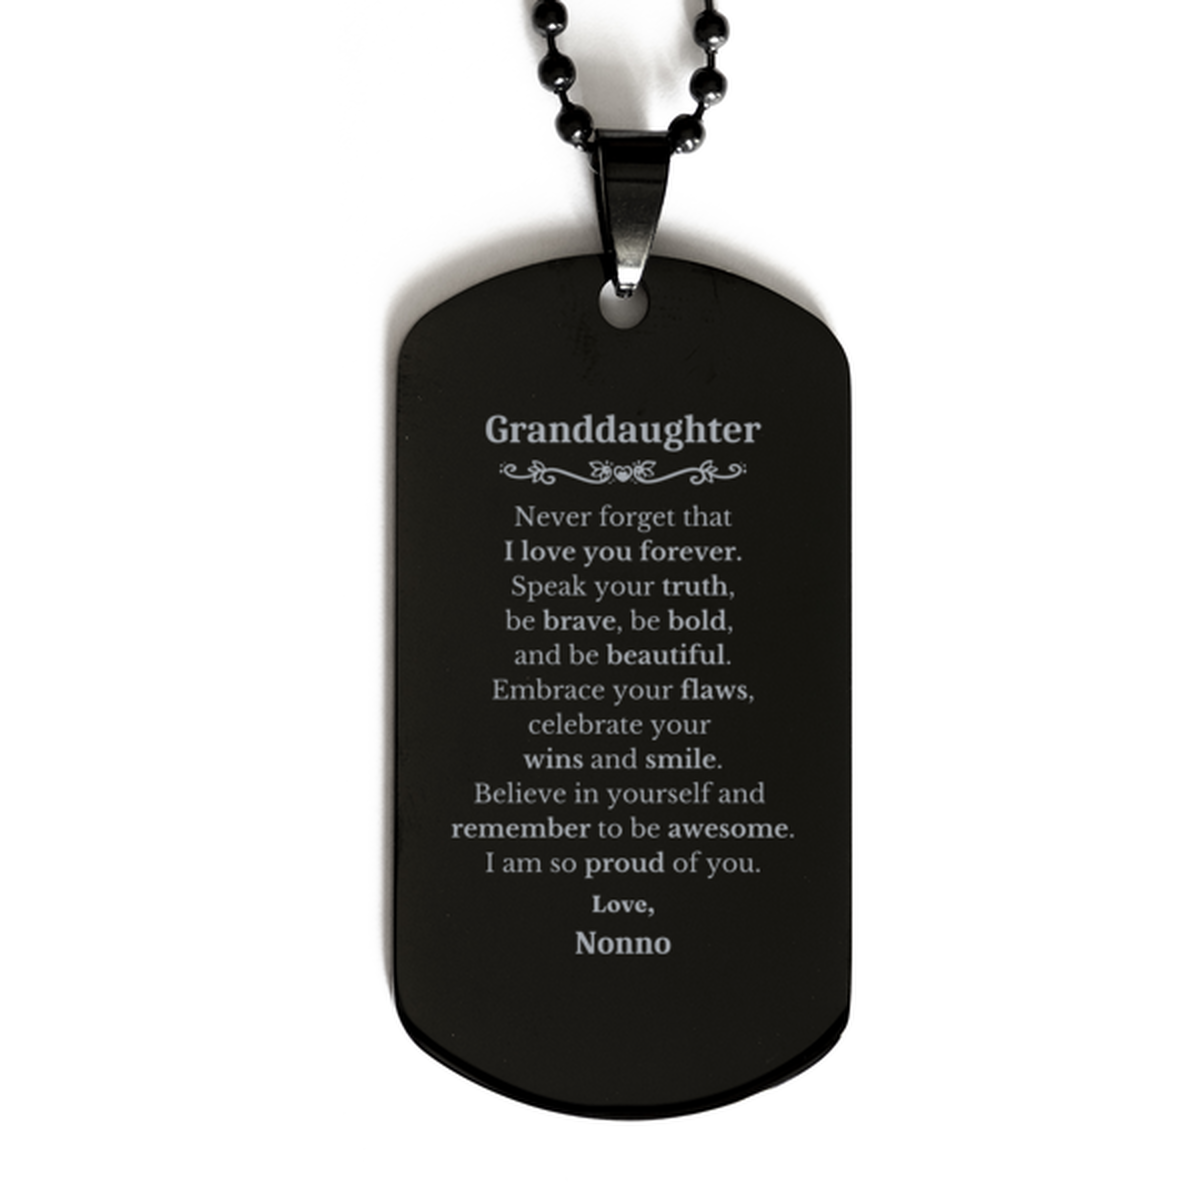 Granddaughter Black Dog Tag, Never forget that I love you forever, Inspirational Granddaughter Birthday Unique Gifts From Nonno